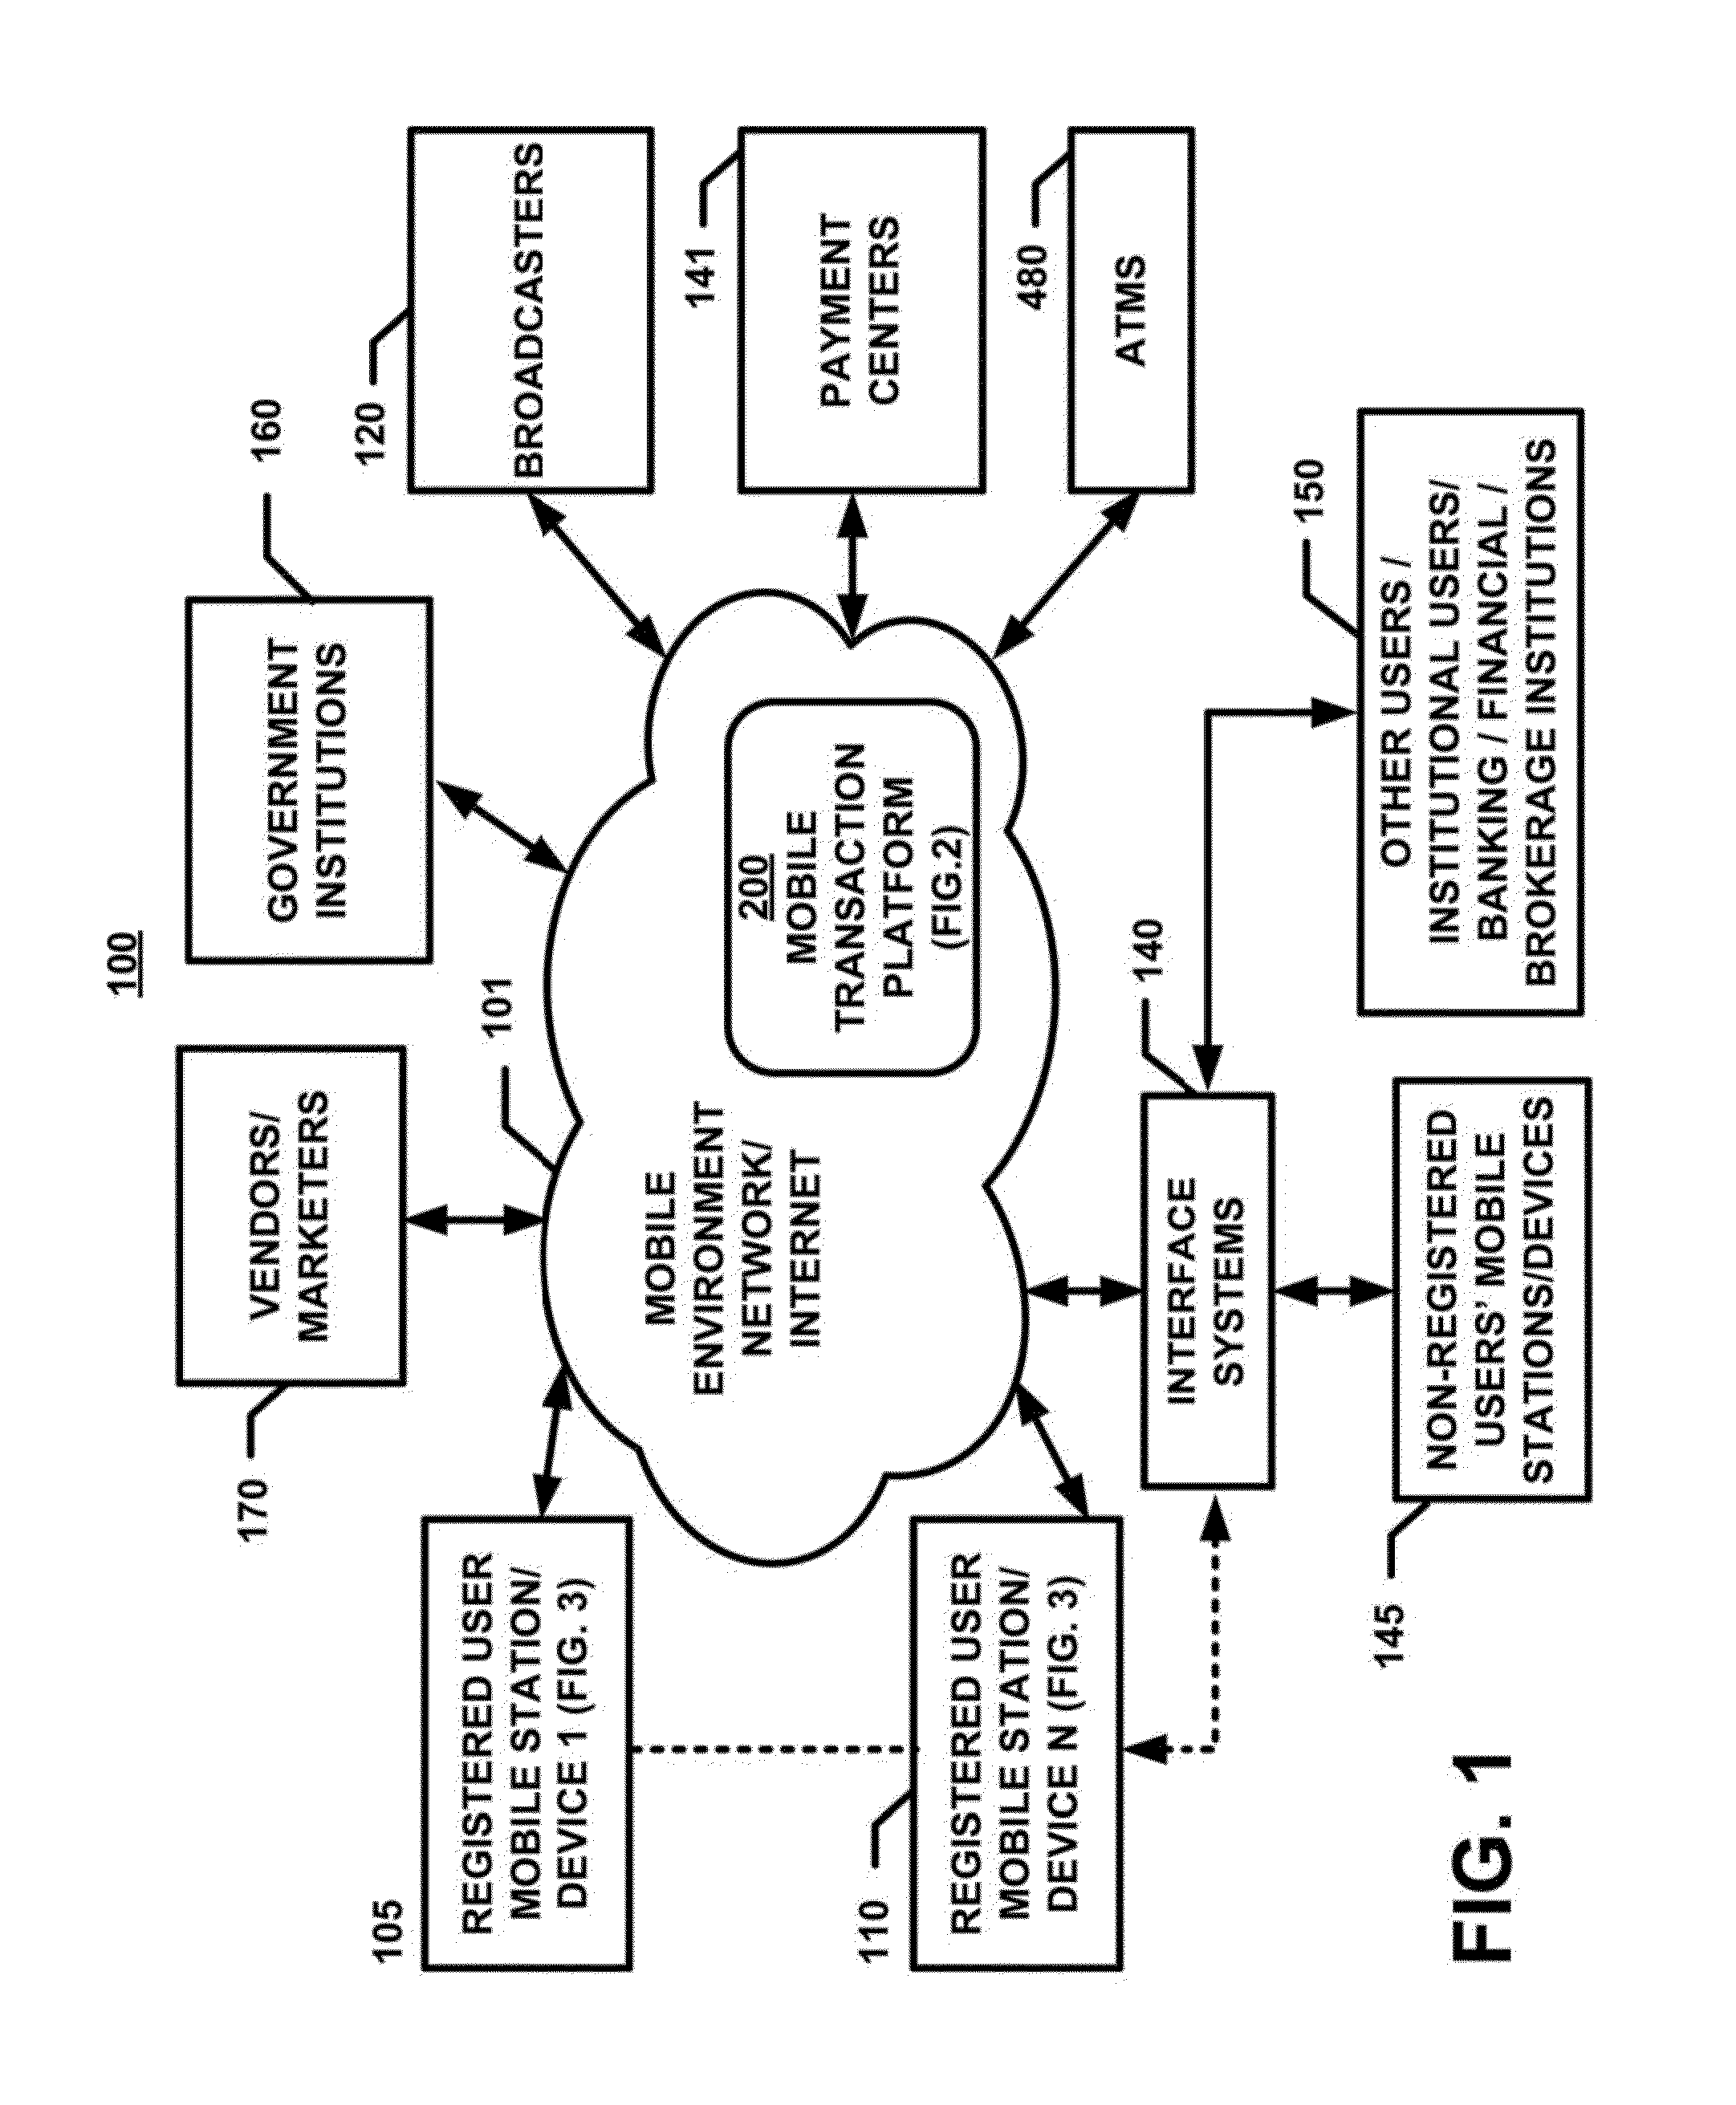 System And Associated Method And Service For Providing A Platform That Allows For The Exchange Of Cash Between Members In A Mobile Environment